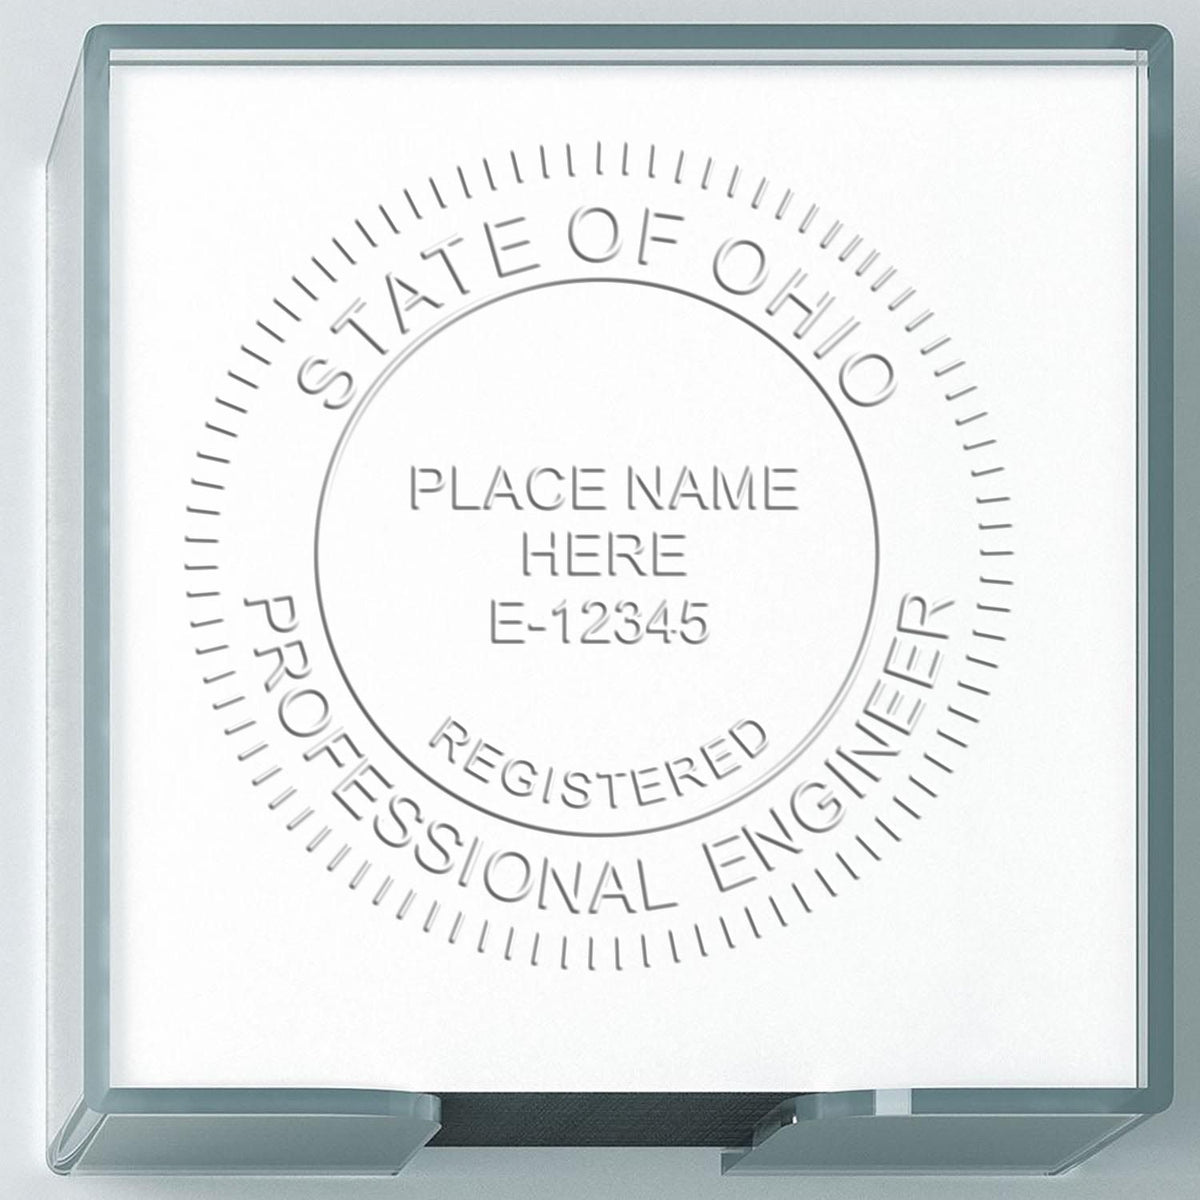 An alternative view of the Heavy Duty Cast Iron Ohio Engineer Seal Embosser stamped on a sheet of paper showing the image in use